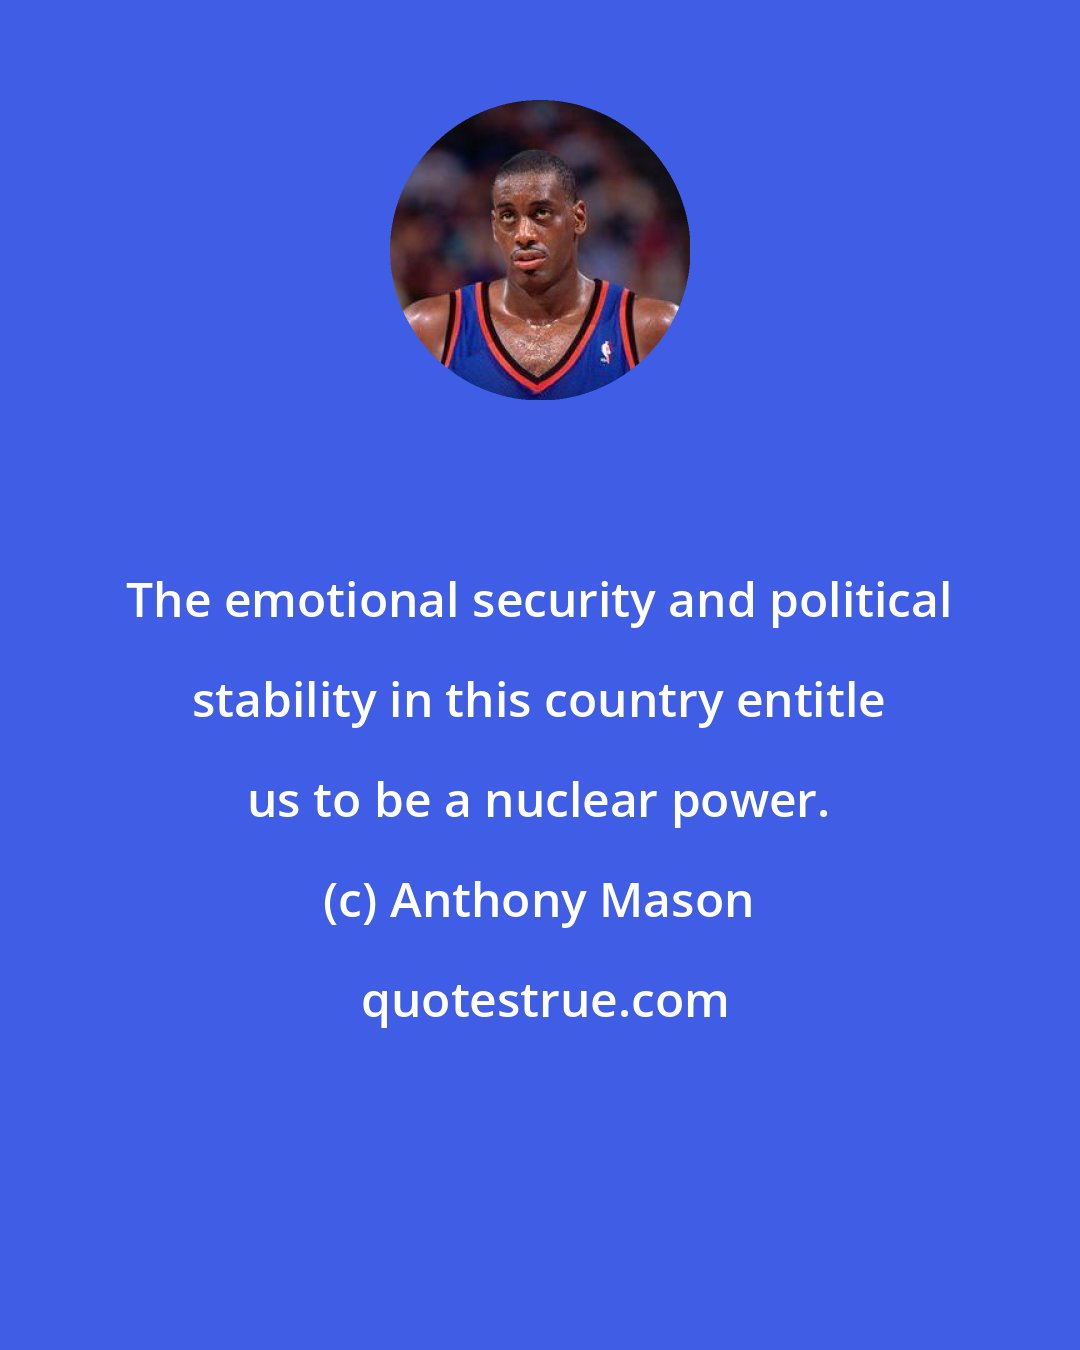 Anthony Mason: The emotional security and political stability in this country entitle us to be a nuclear power.